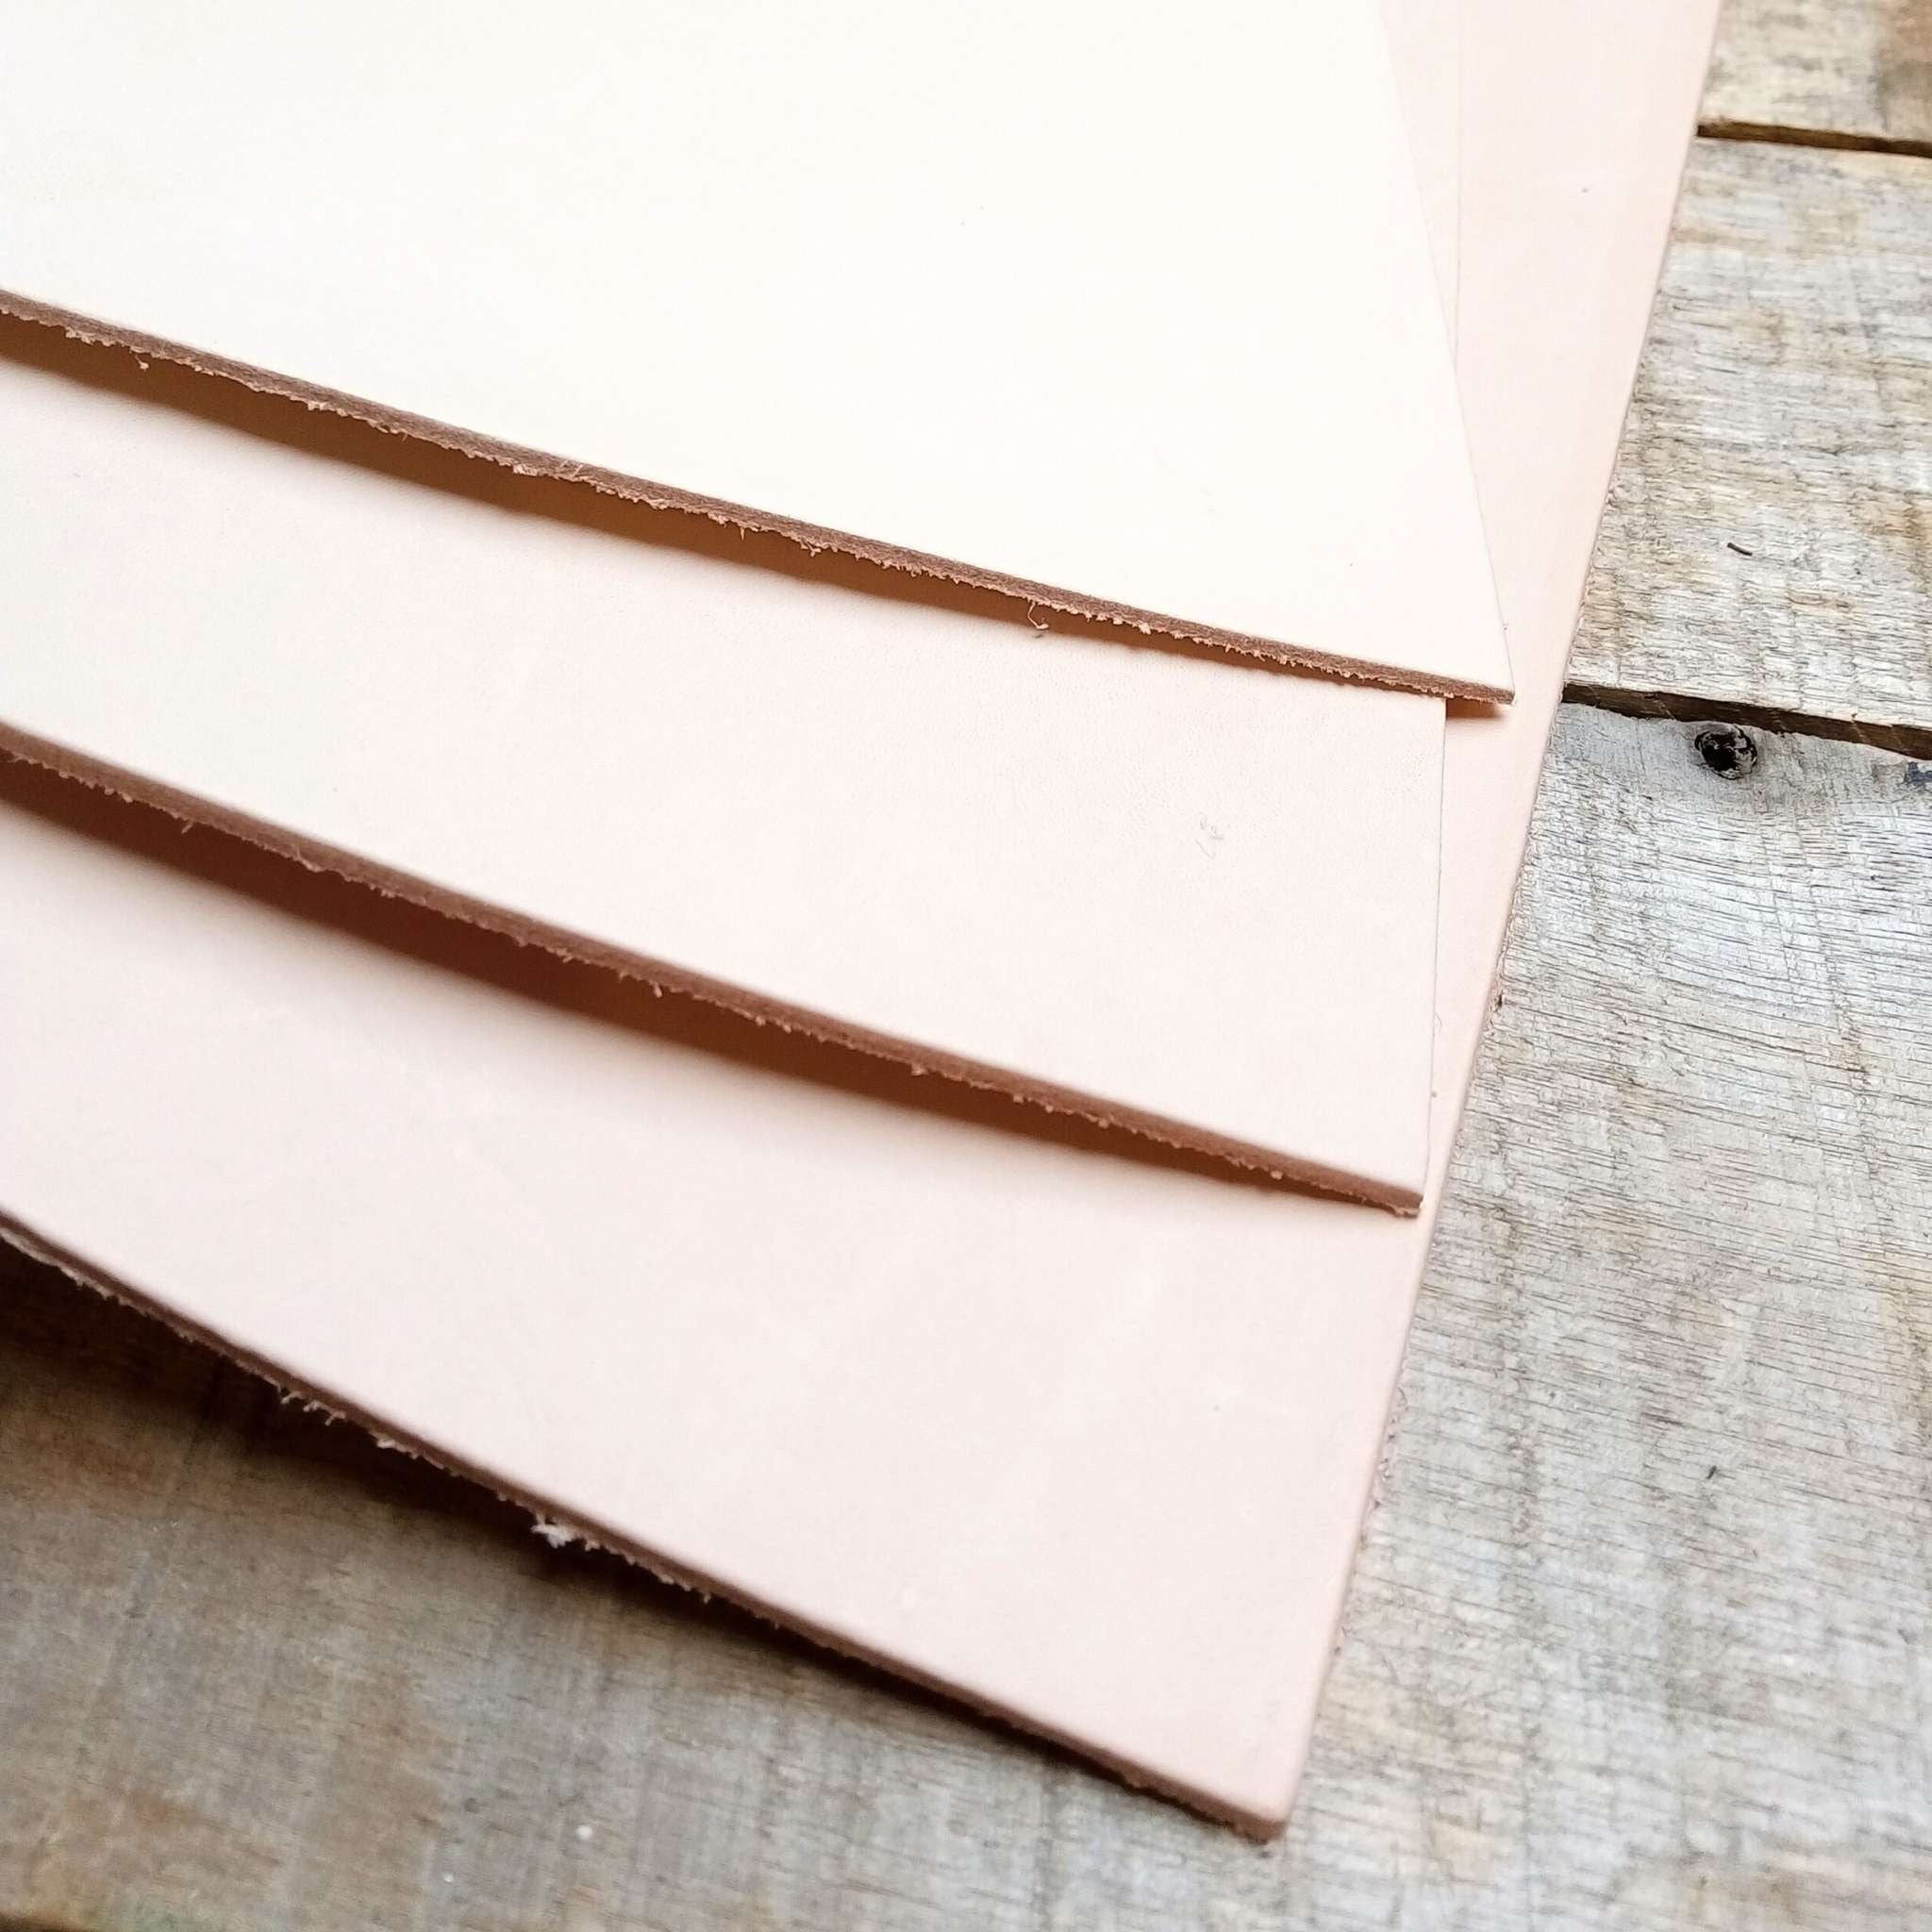 Natural Veg Tanned Leather - A3 from Identity Leathercraft